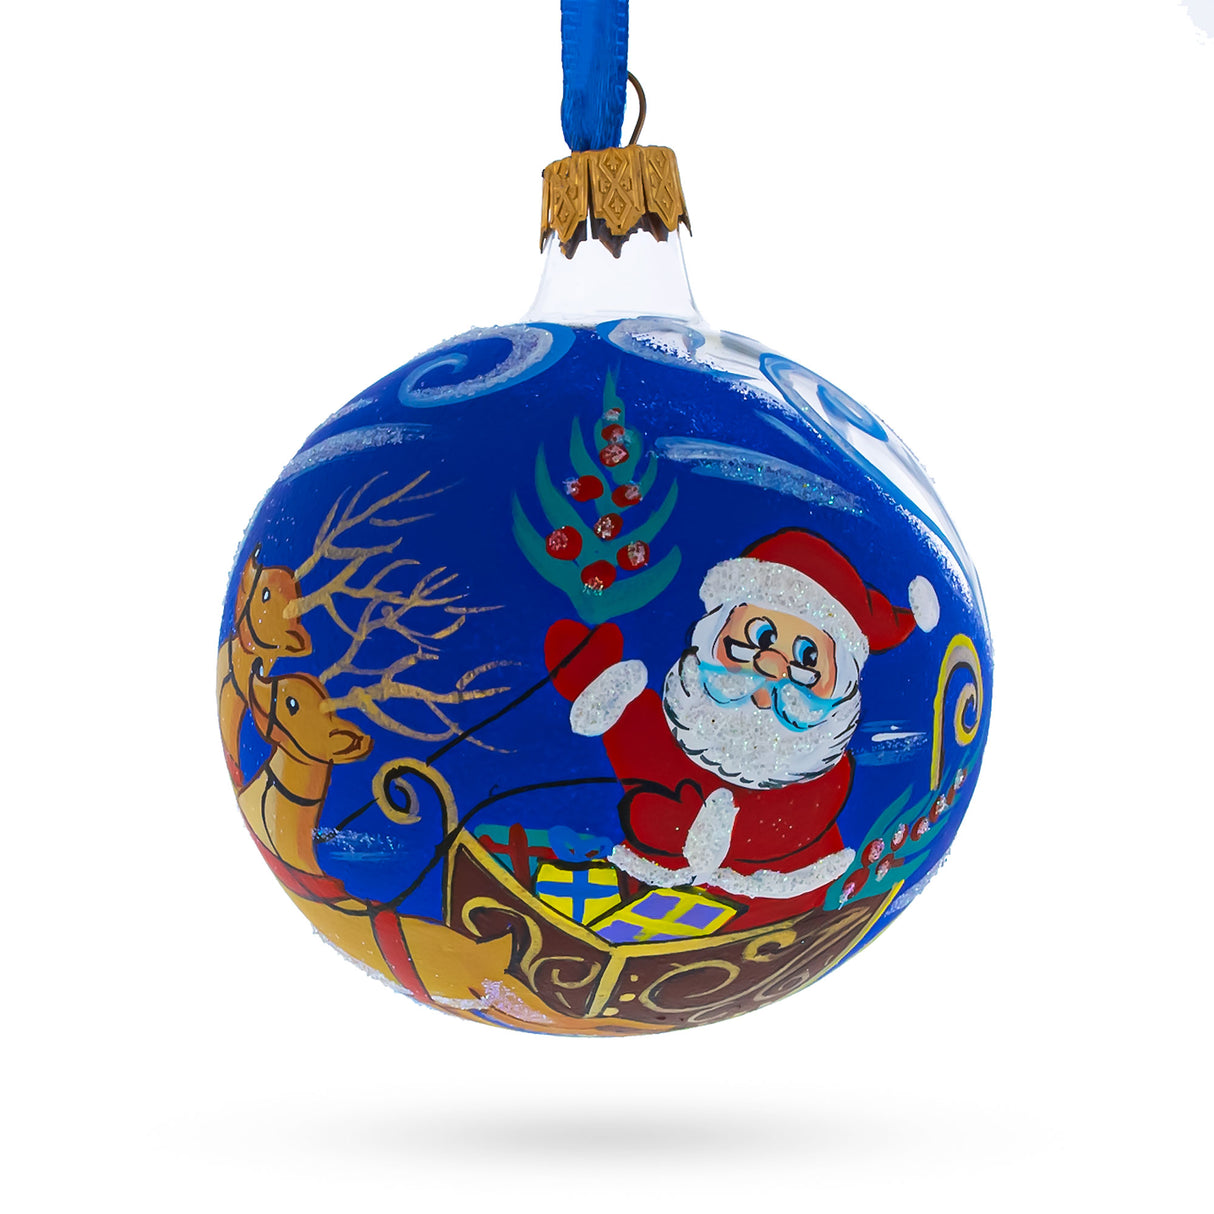 Glass Jolly Santa Riding Sleigh with Reindeer Blown Glass Ball Christmas Ornament 3.25 Inches in Blue color Round